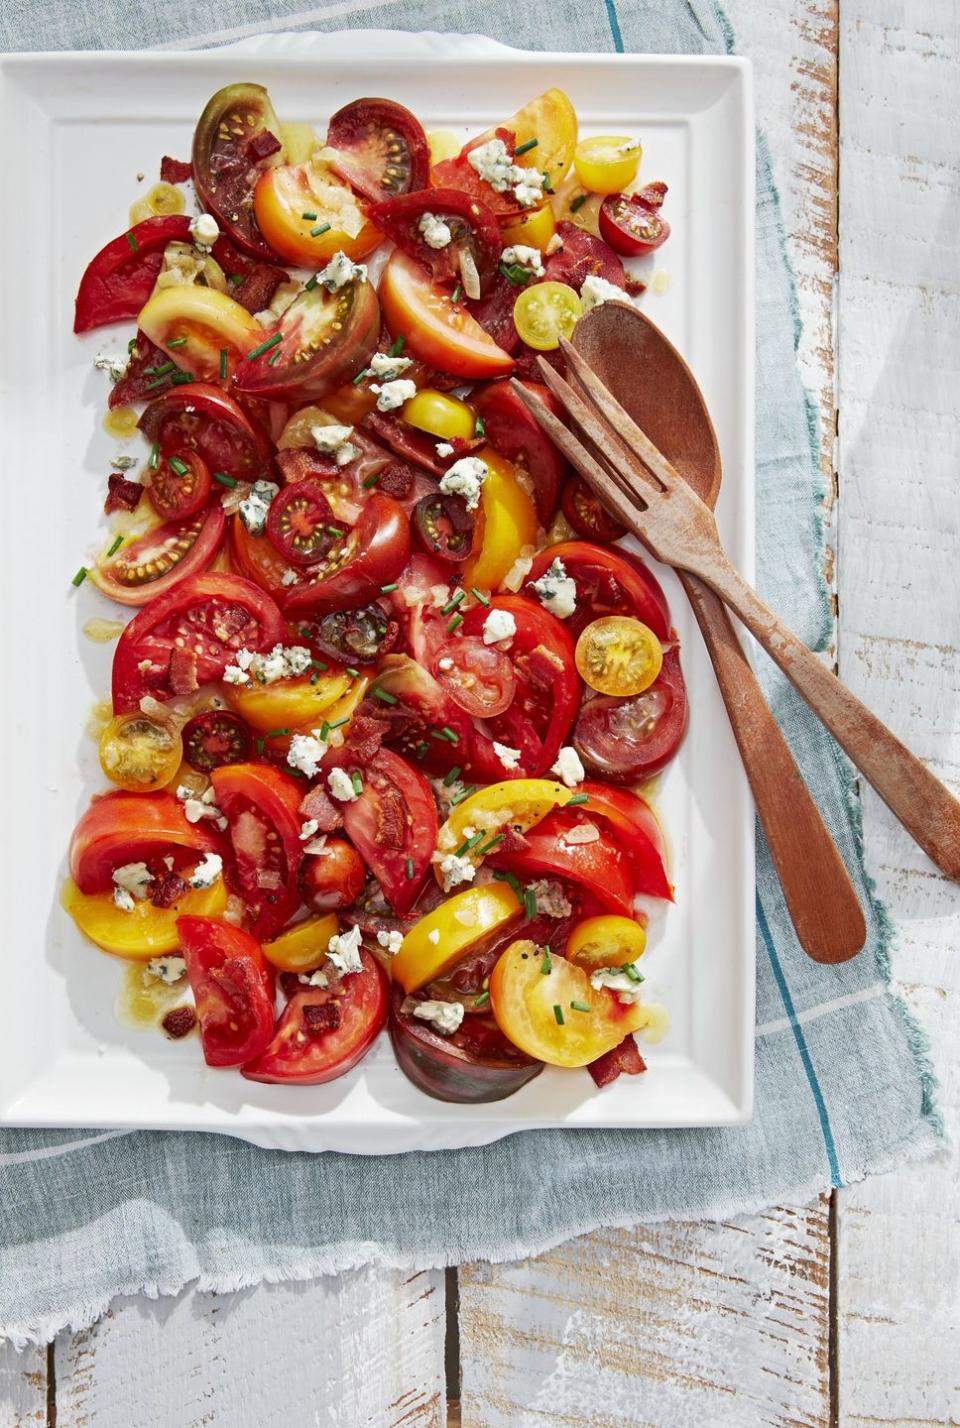 tomato salad with bacon vinaigrette on a white rectangle plate with wooden serving utensils